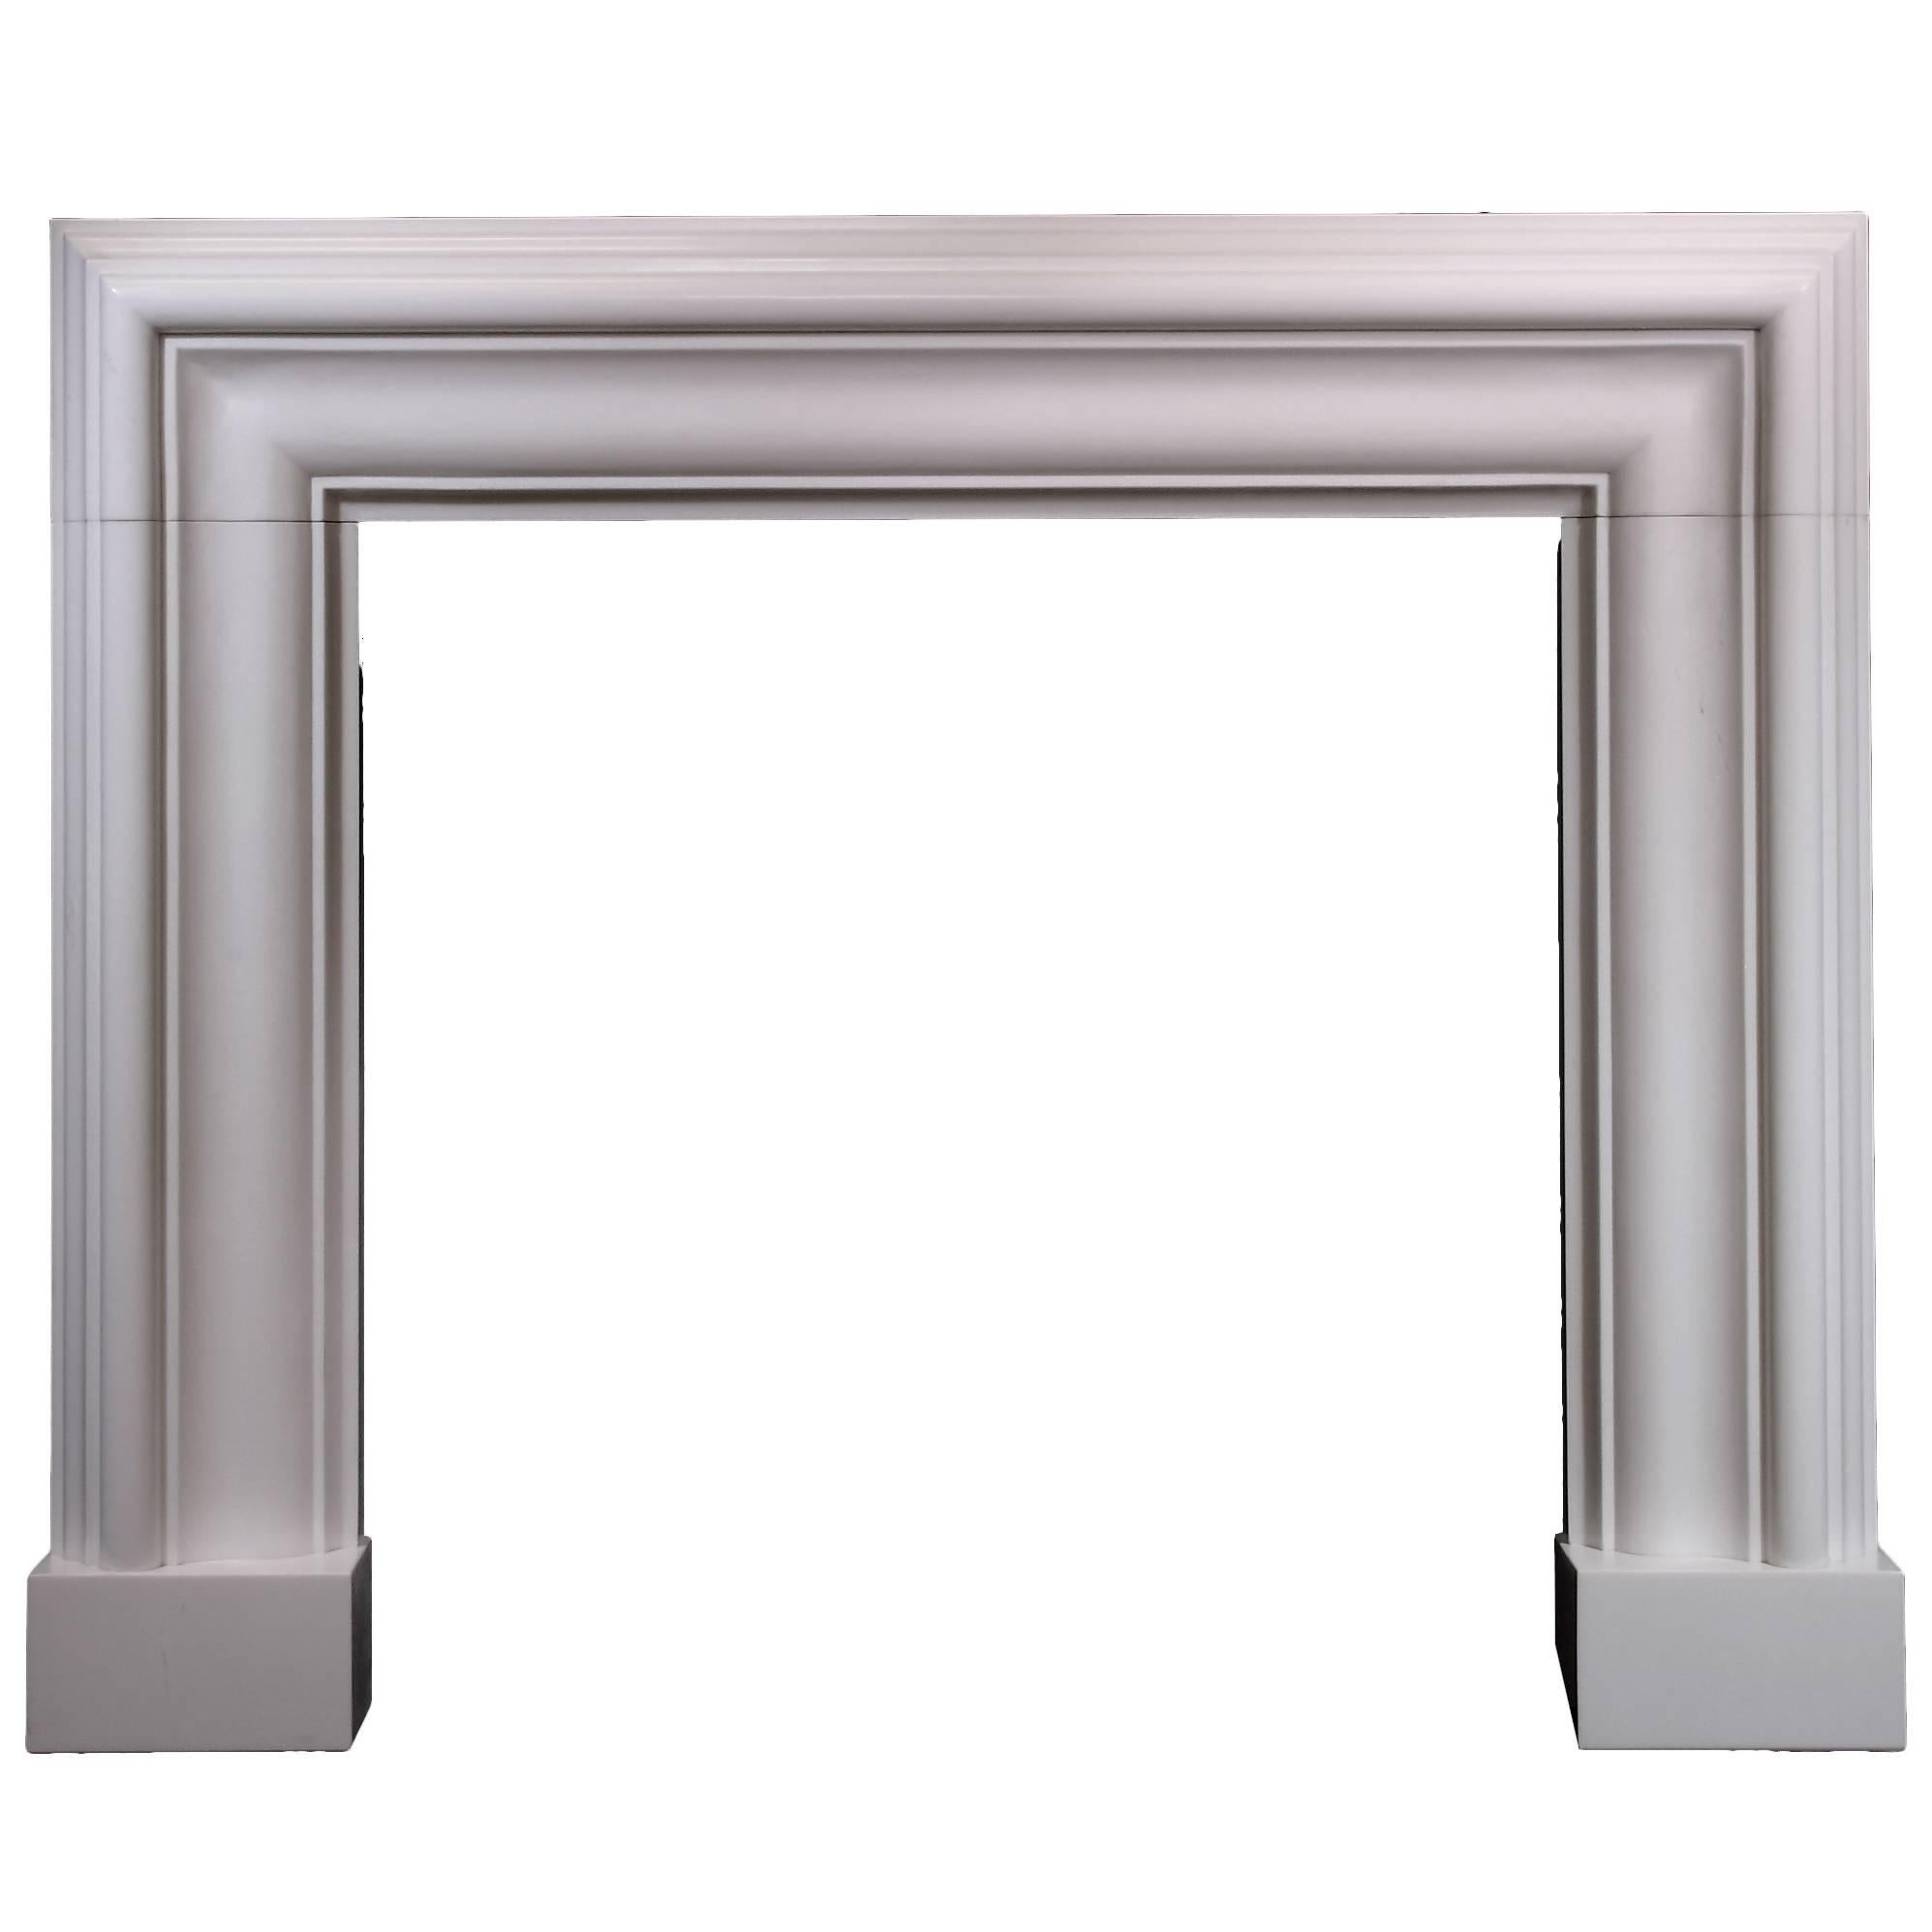 Reproduction Sir Edwin Lutyens Designed Bolection Mantel in Statuary Marble